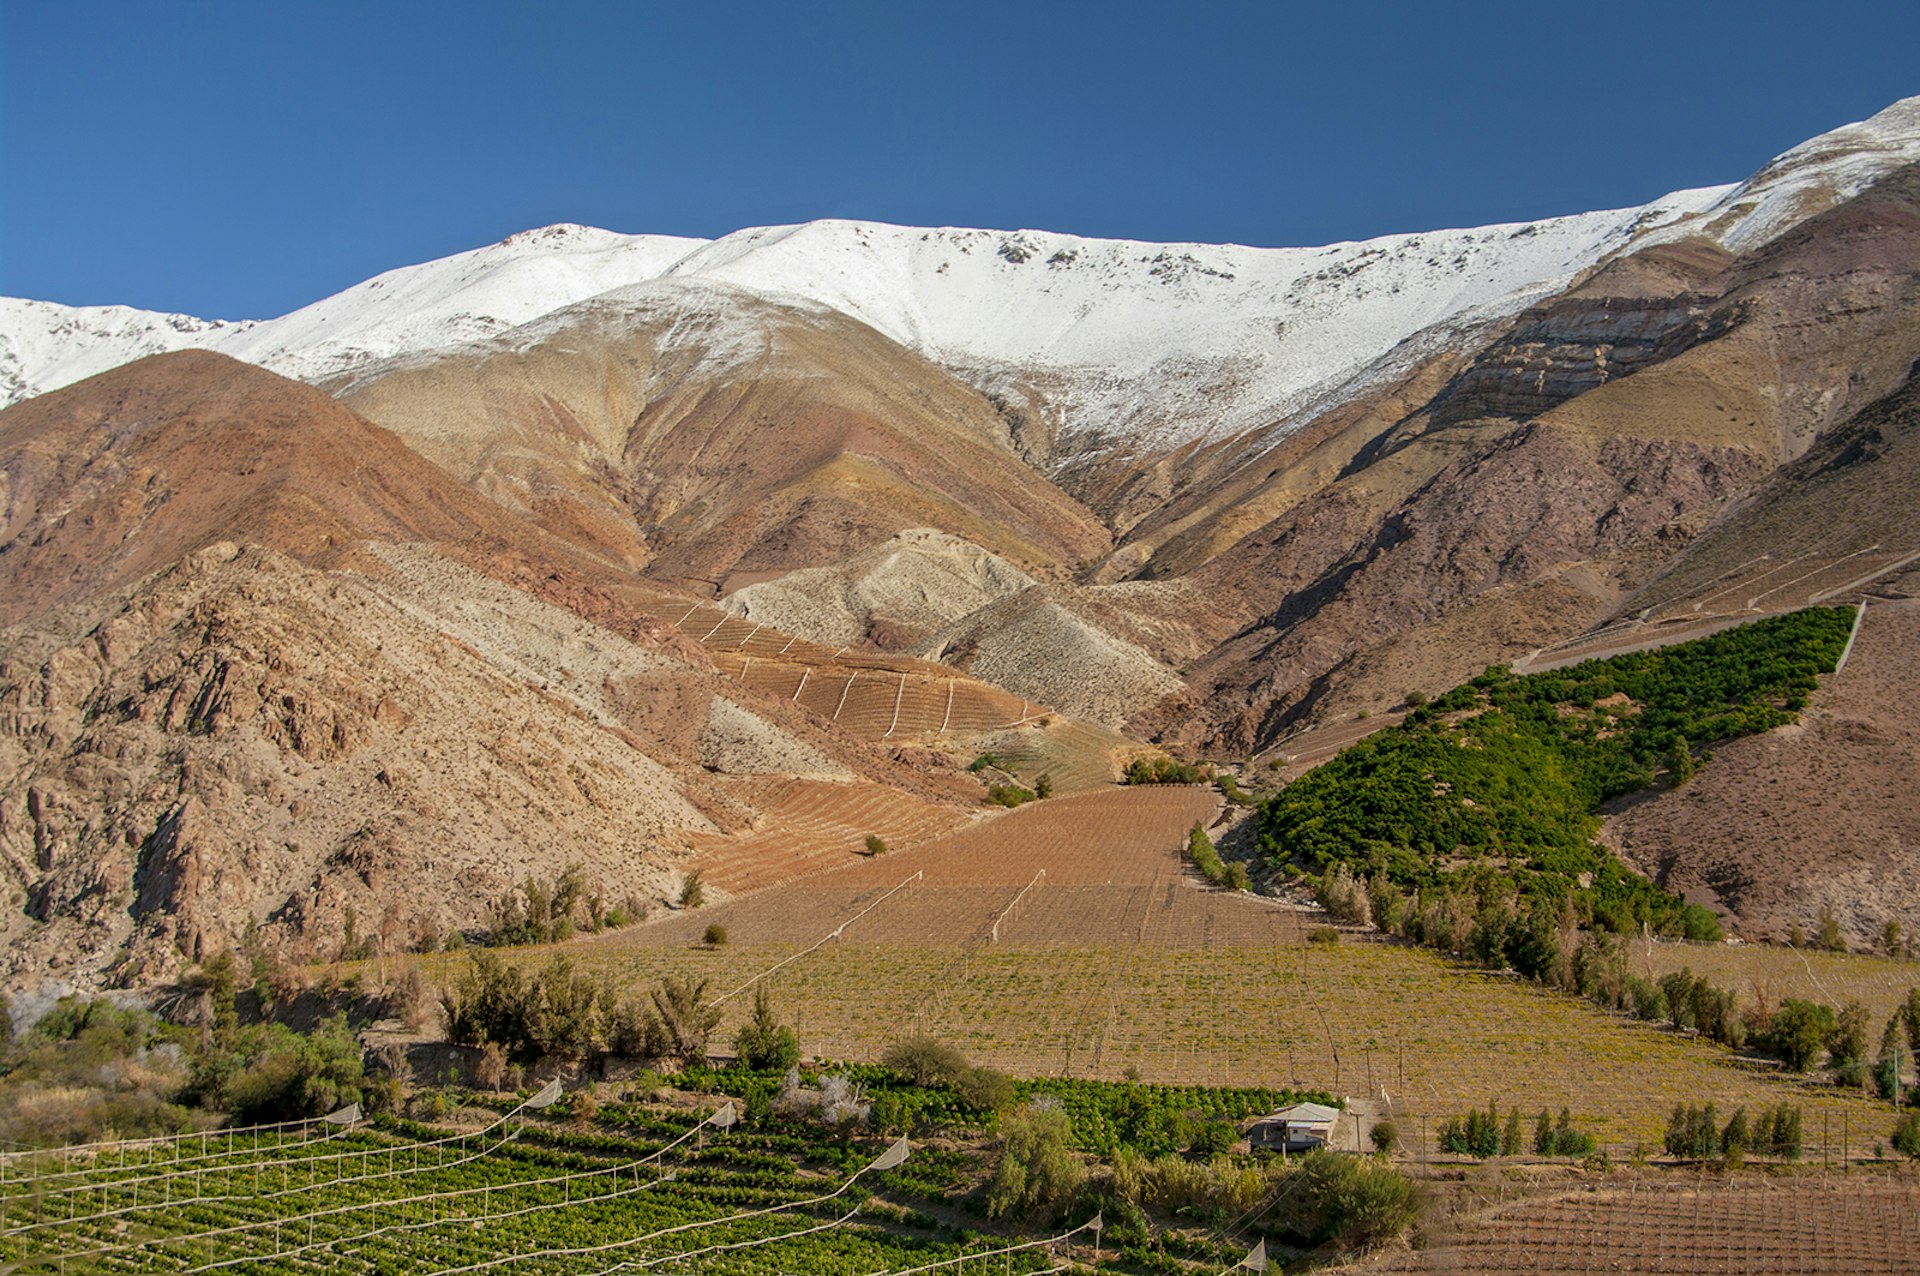 A valley floor covered in vineyards backing up to a snowcapped mountain range © Photography By Jessie Reeder / Getty Images